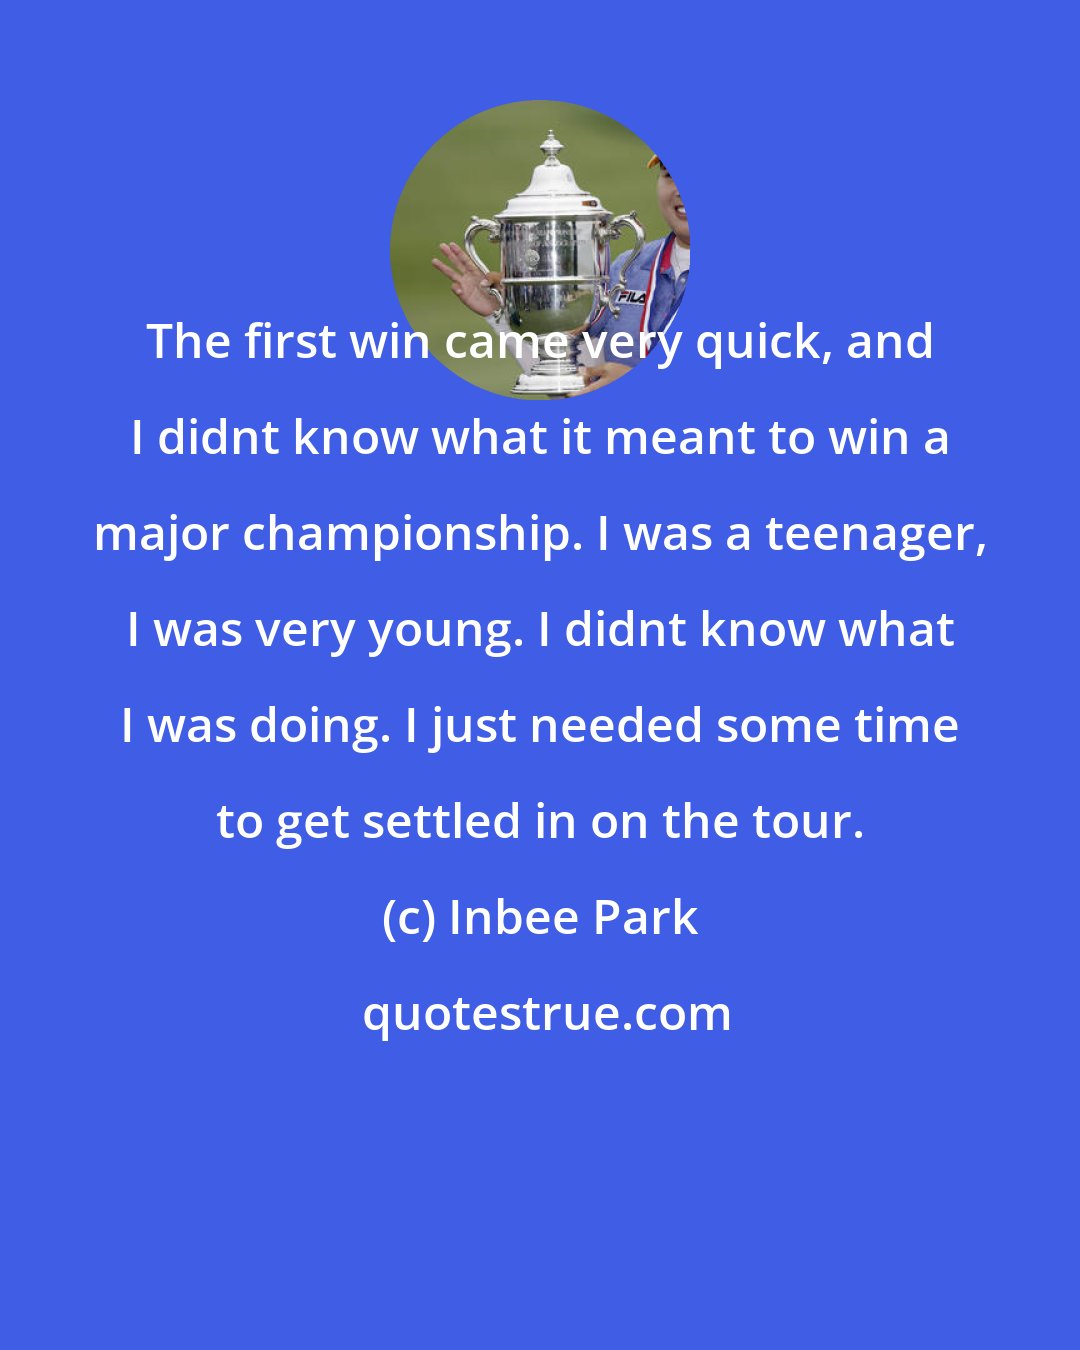 Inbee Park: The first win came very quick, and I didnt know what it meant to win a major championship. I was a teenager, I was very young. I didnt know what I was doing. I just needed some time to get settled in on the tour.